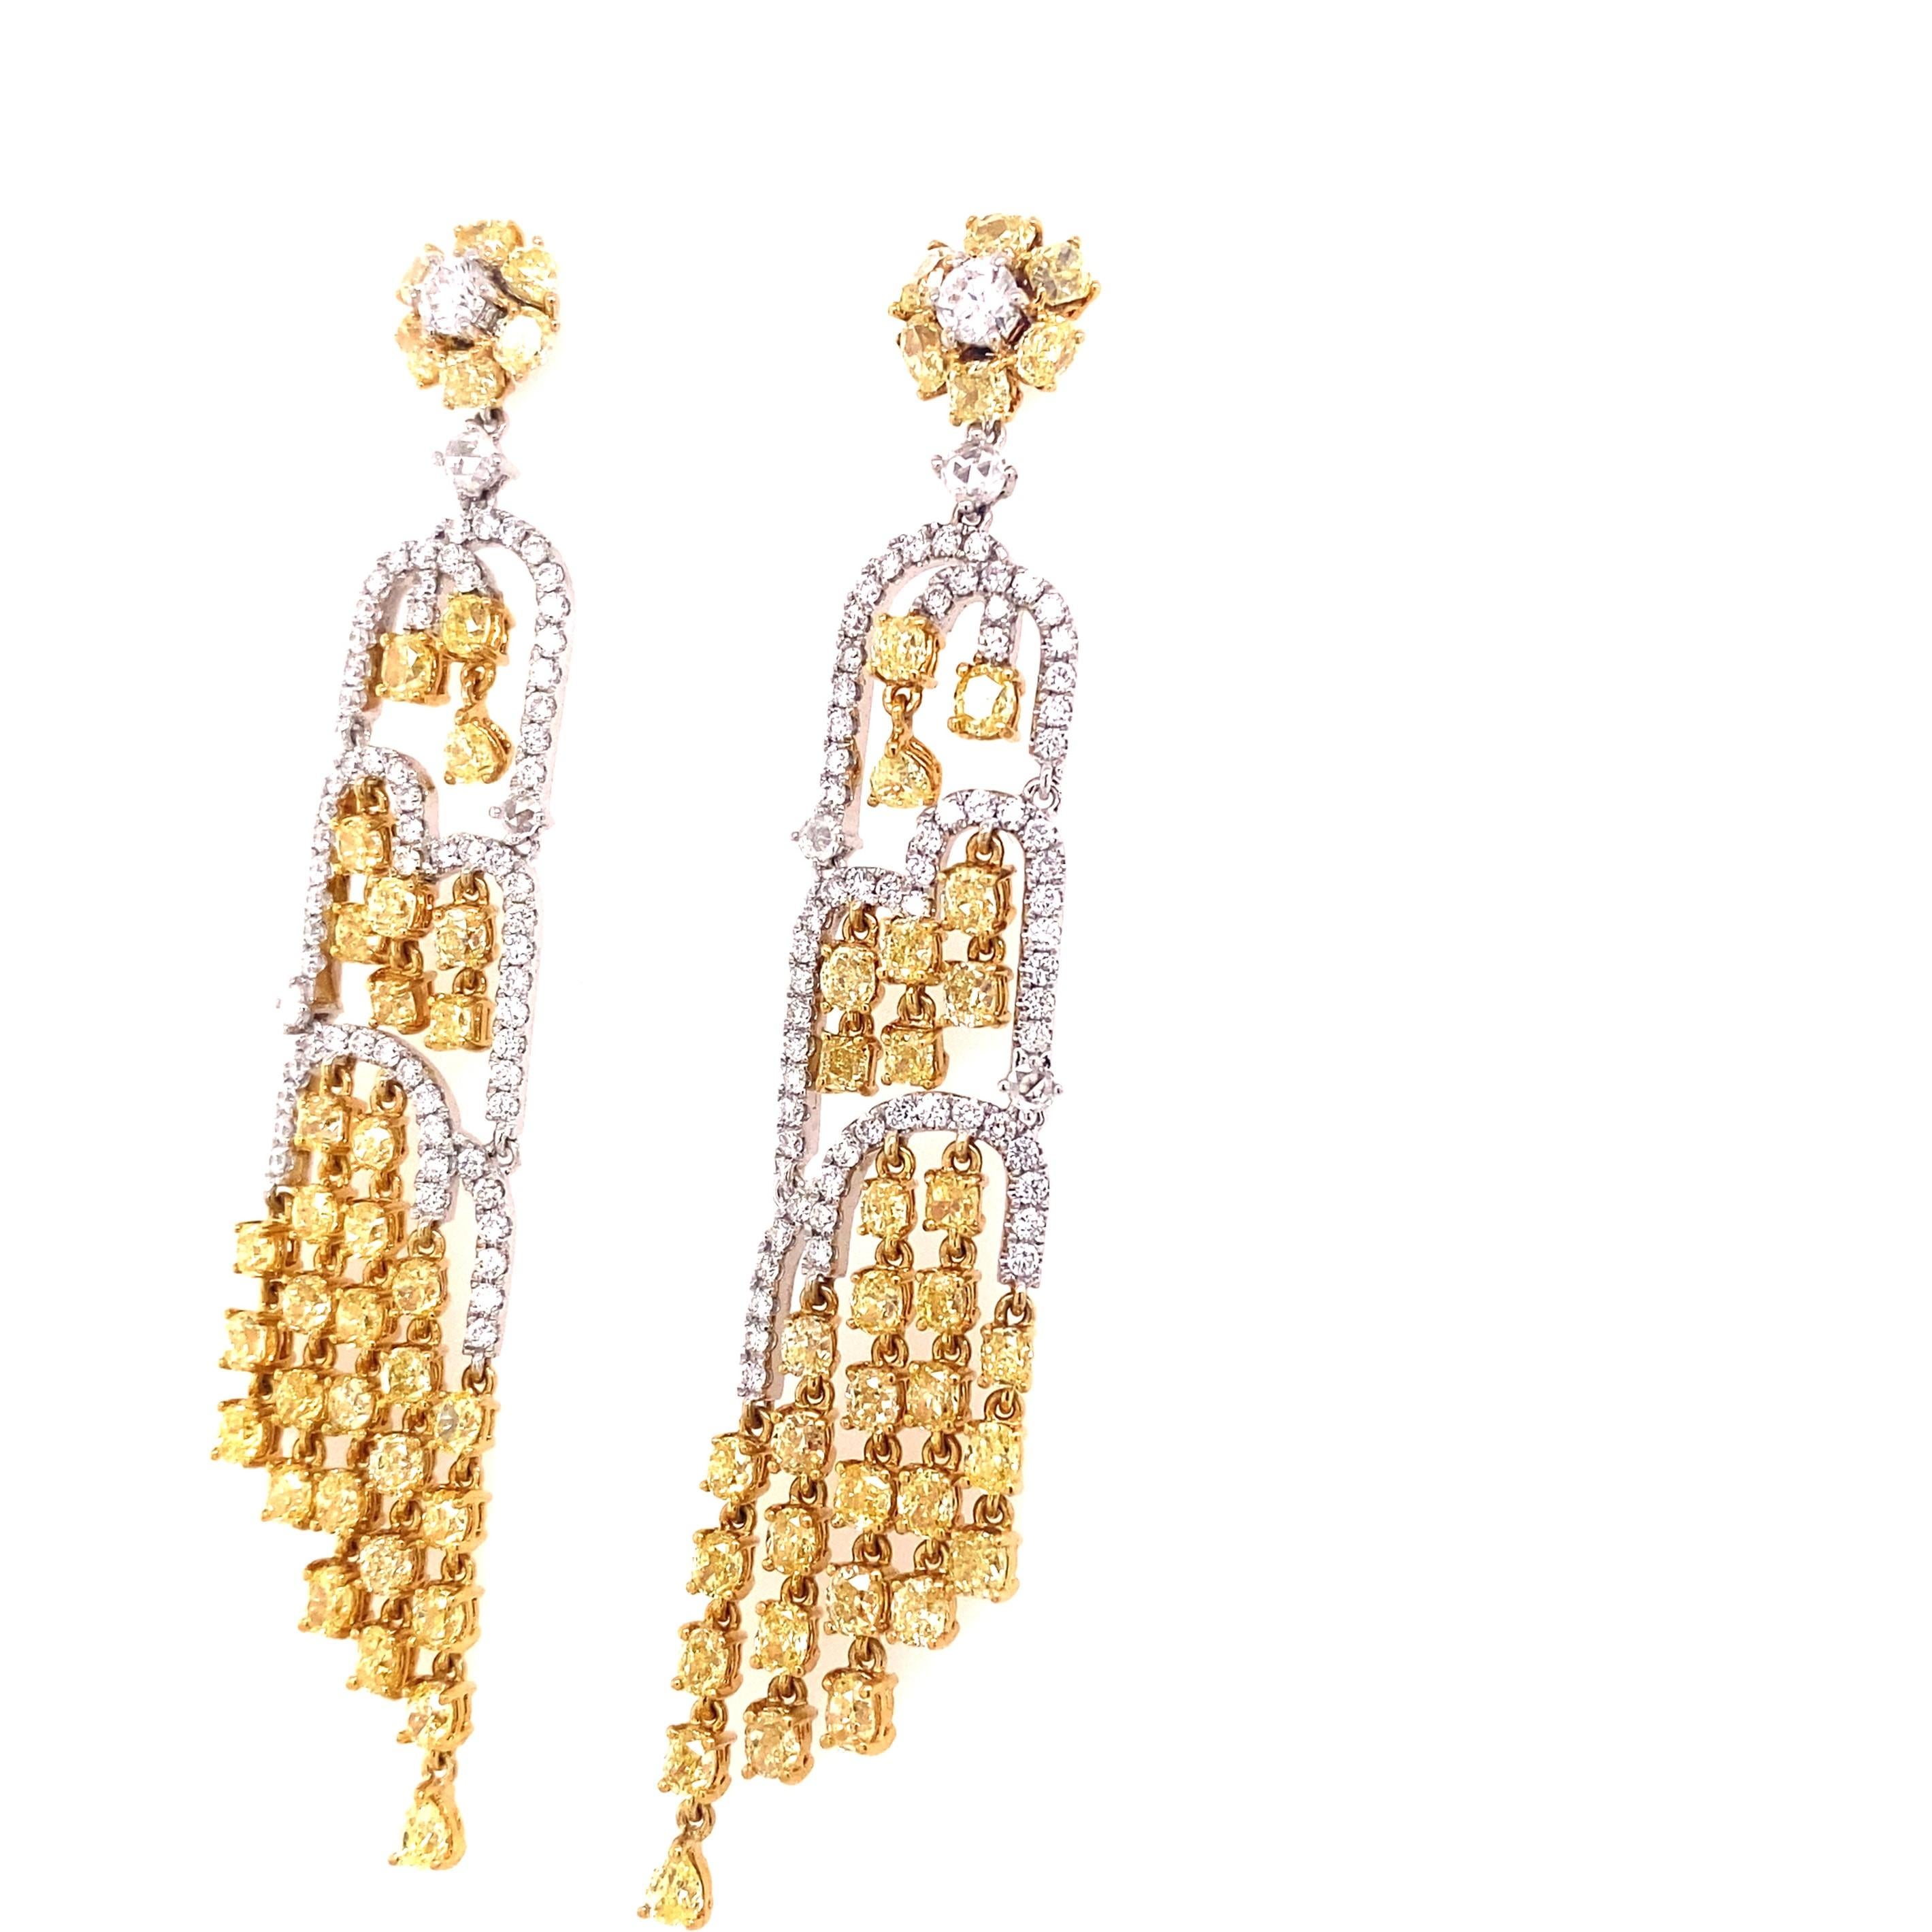 Women's or Men's 9.47 Carat Total in White and Yellow Diamonds, Waterfall Earrings For Sale